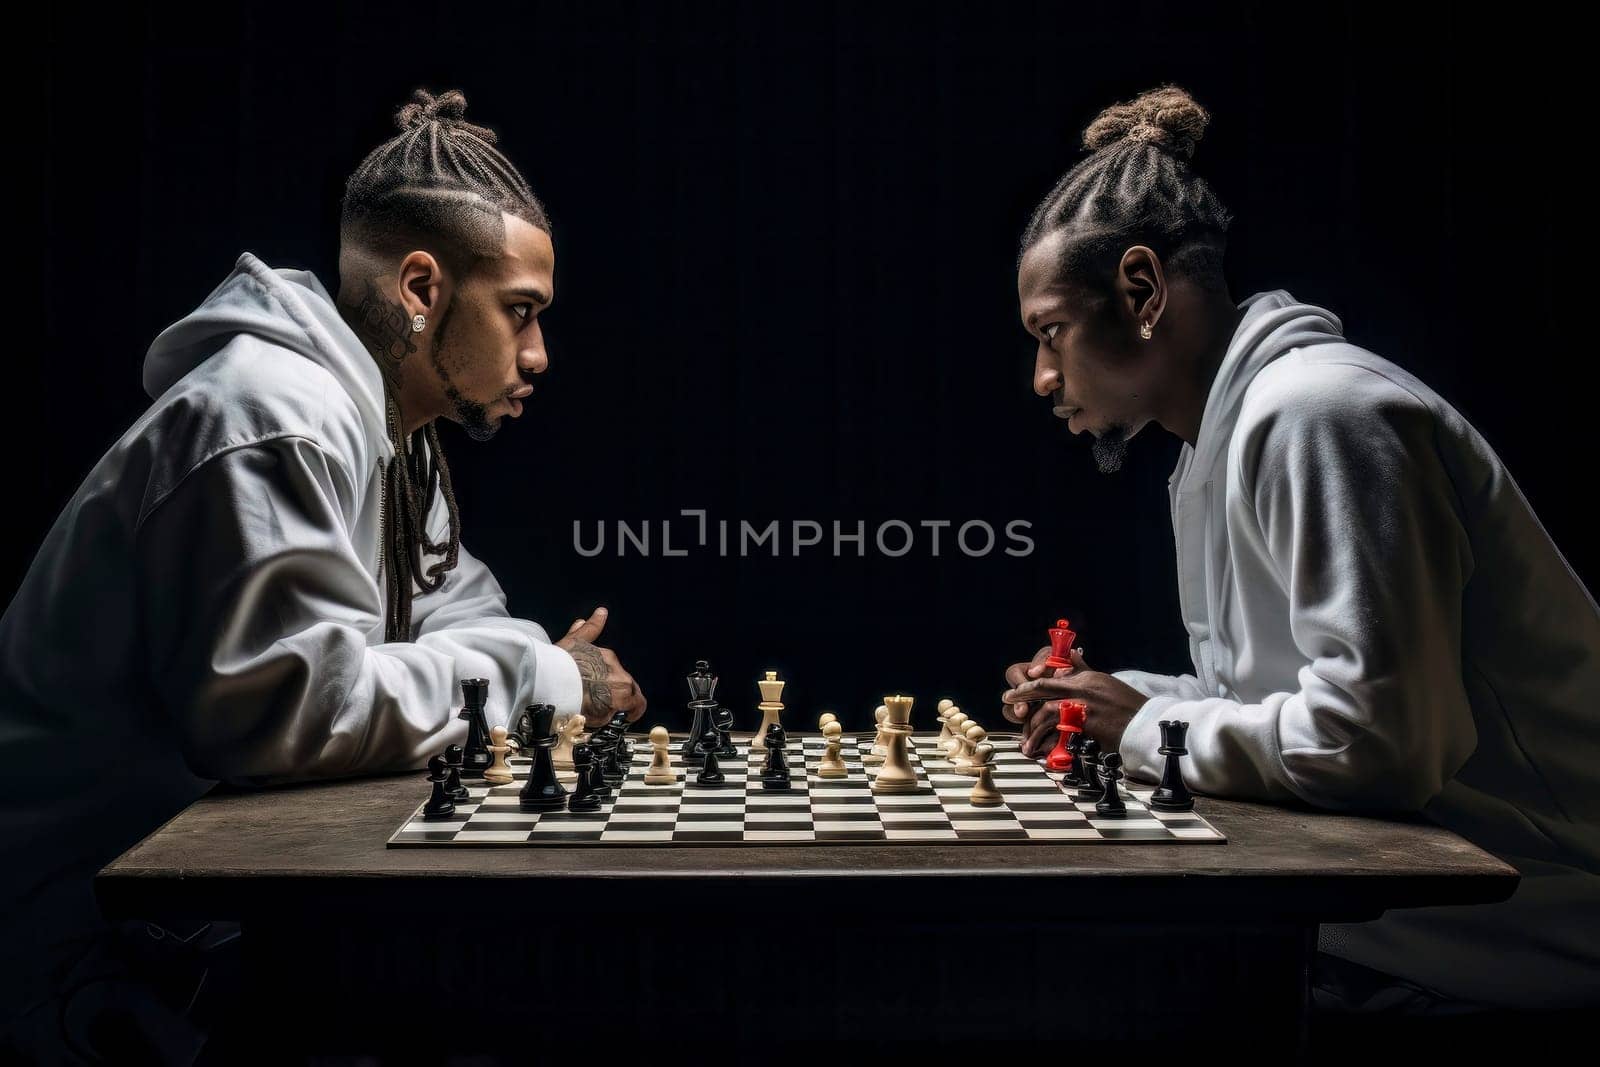 A captivating image of young individuals engaged in a chess game, symbolizing the essence of challenge and strategy.